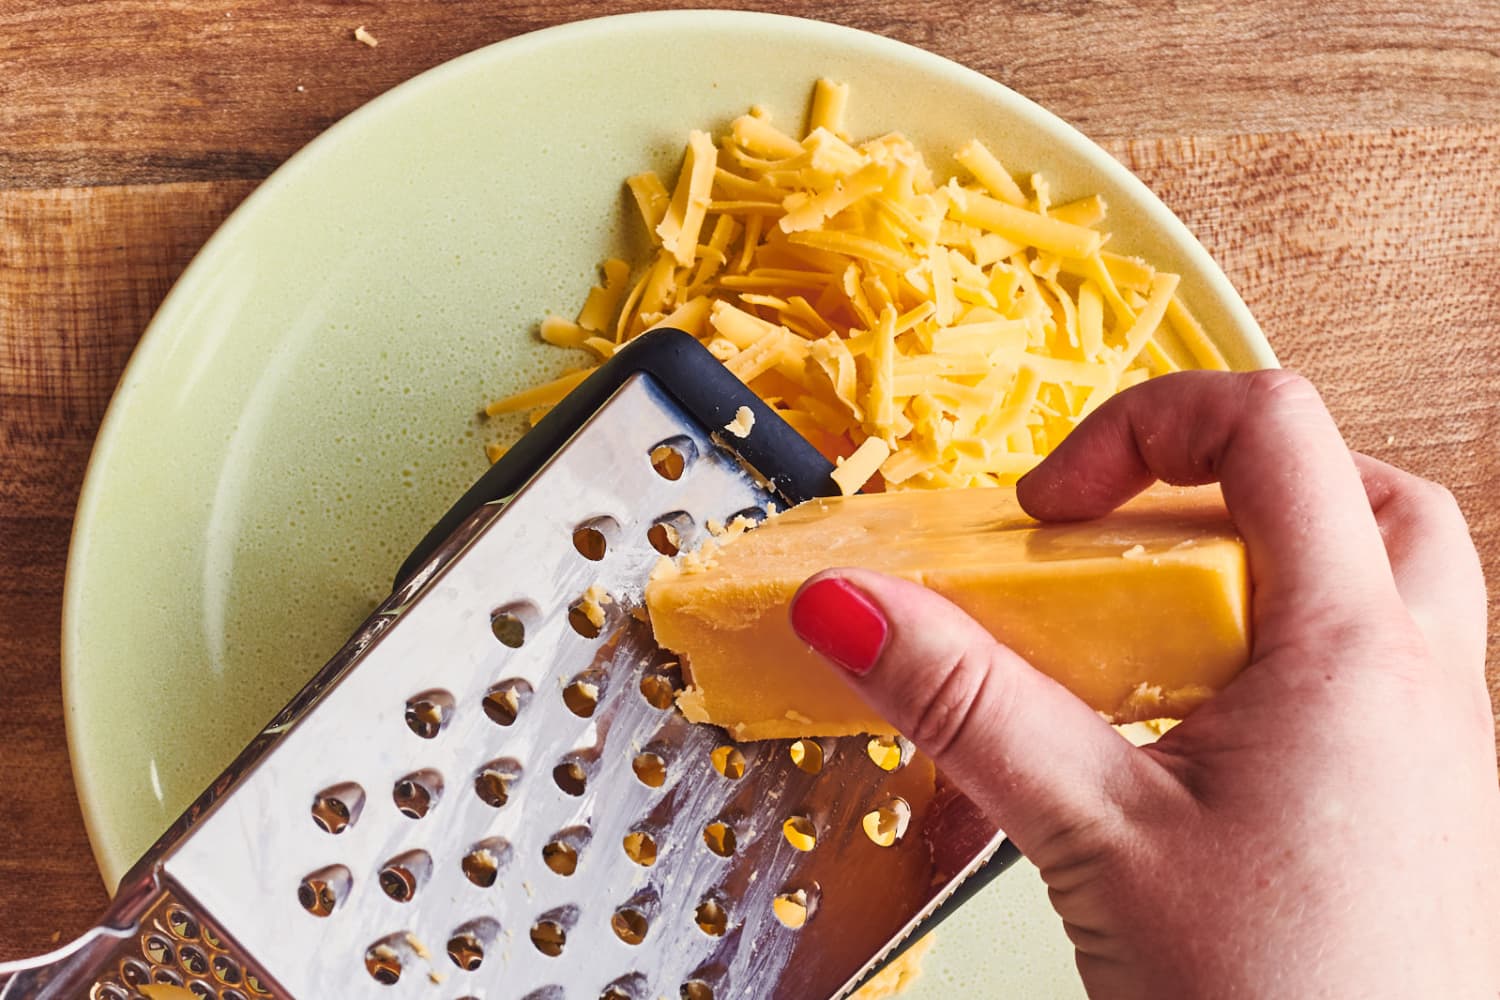 Stop Cheese-Grating Your Feet, Folks